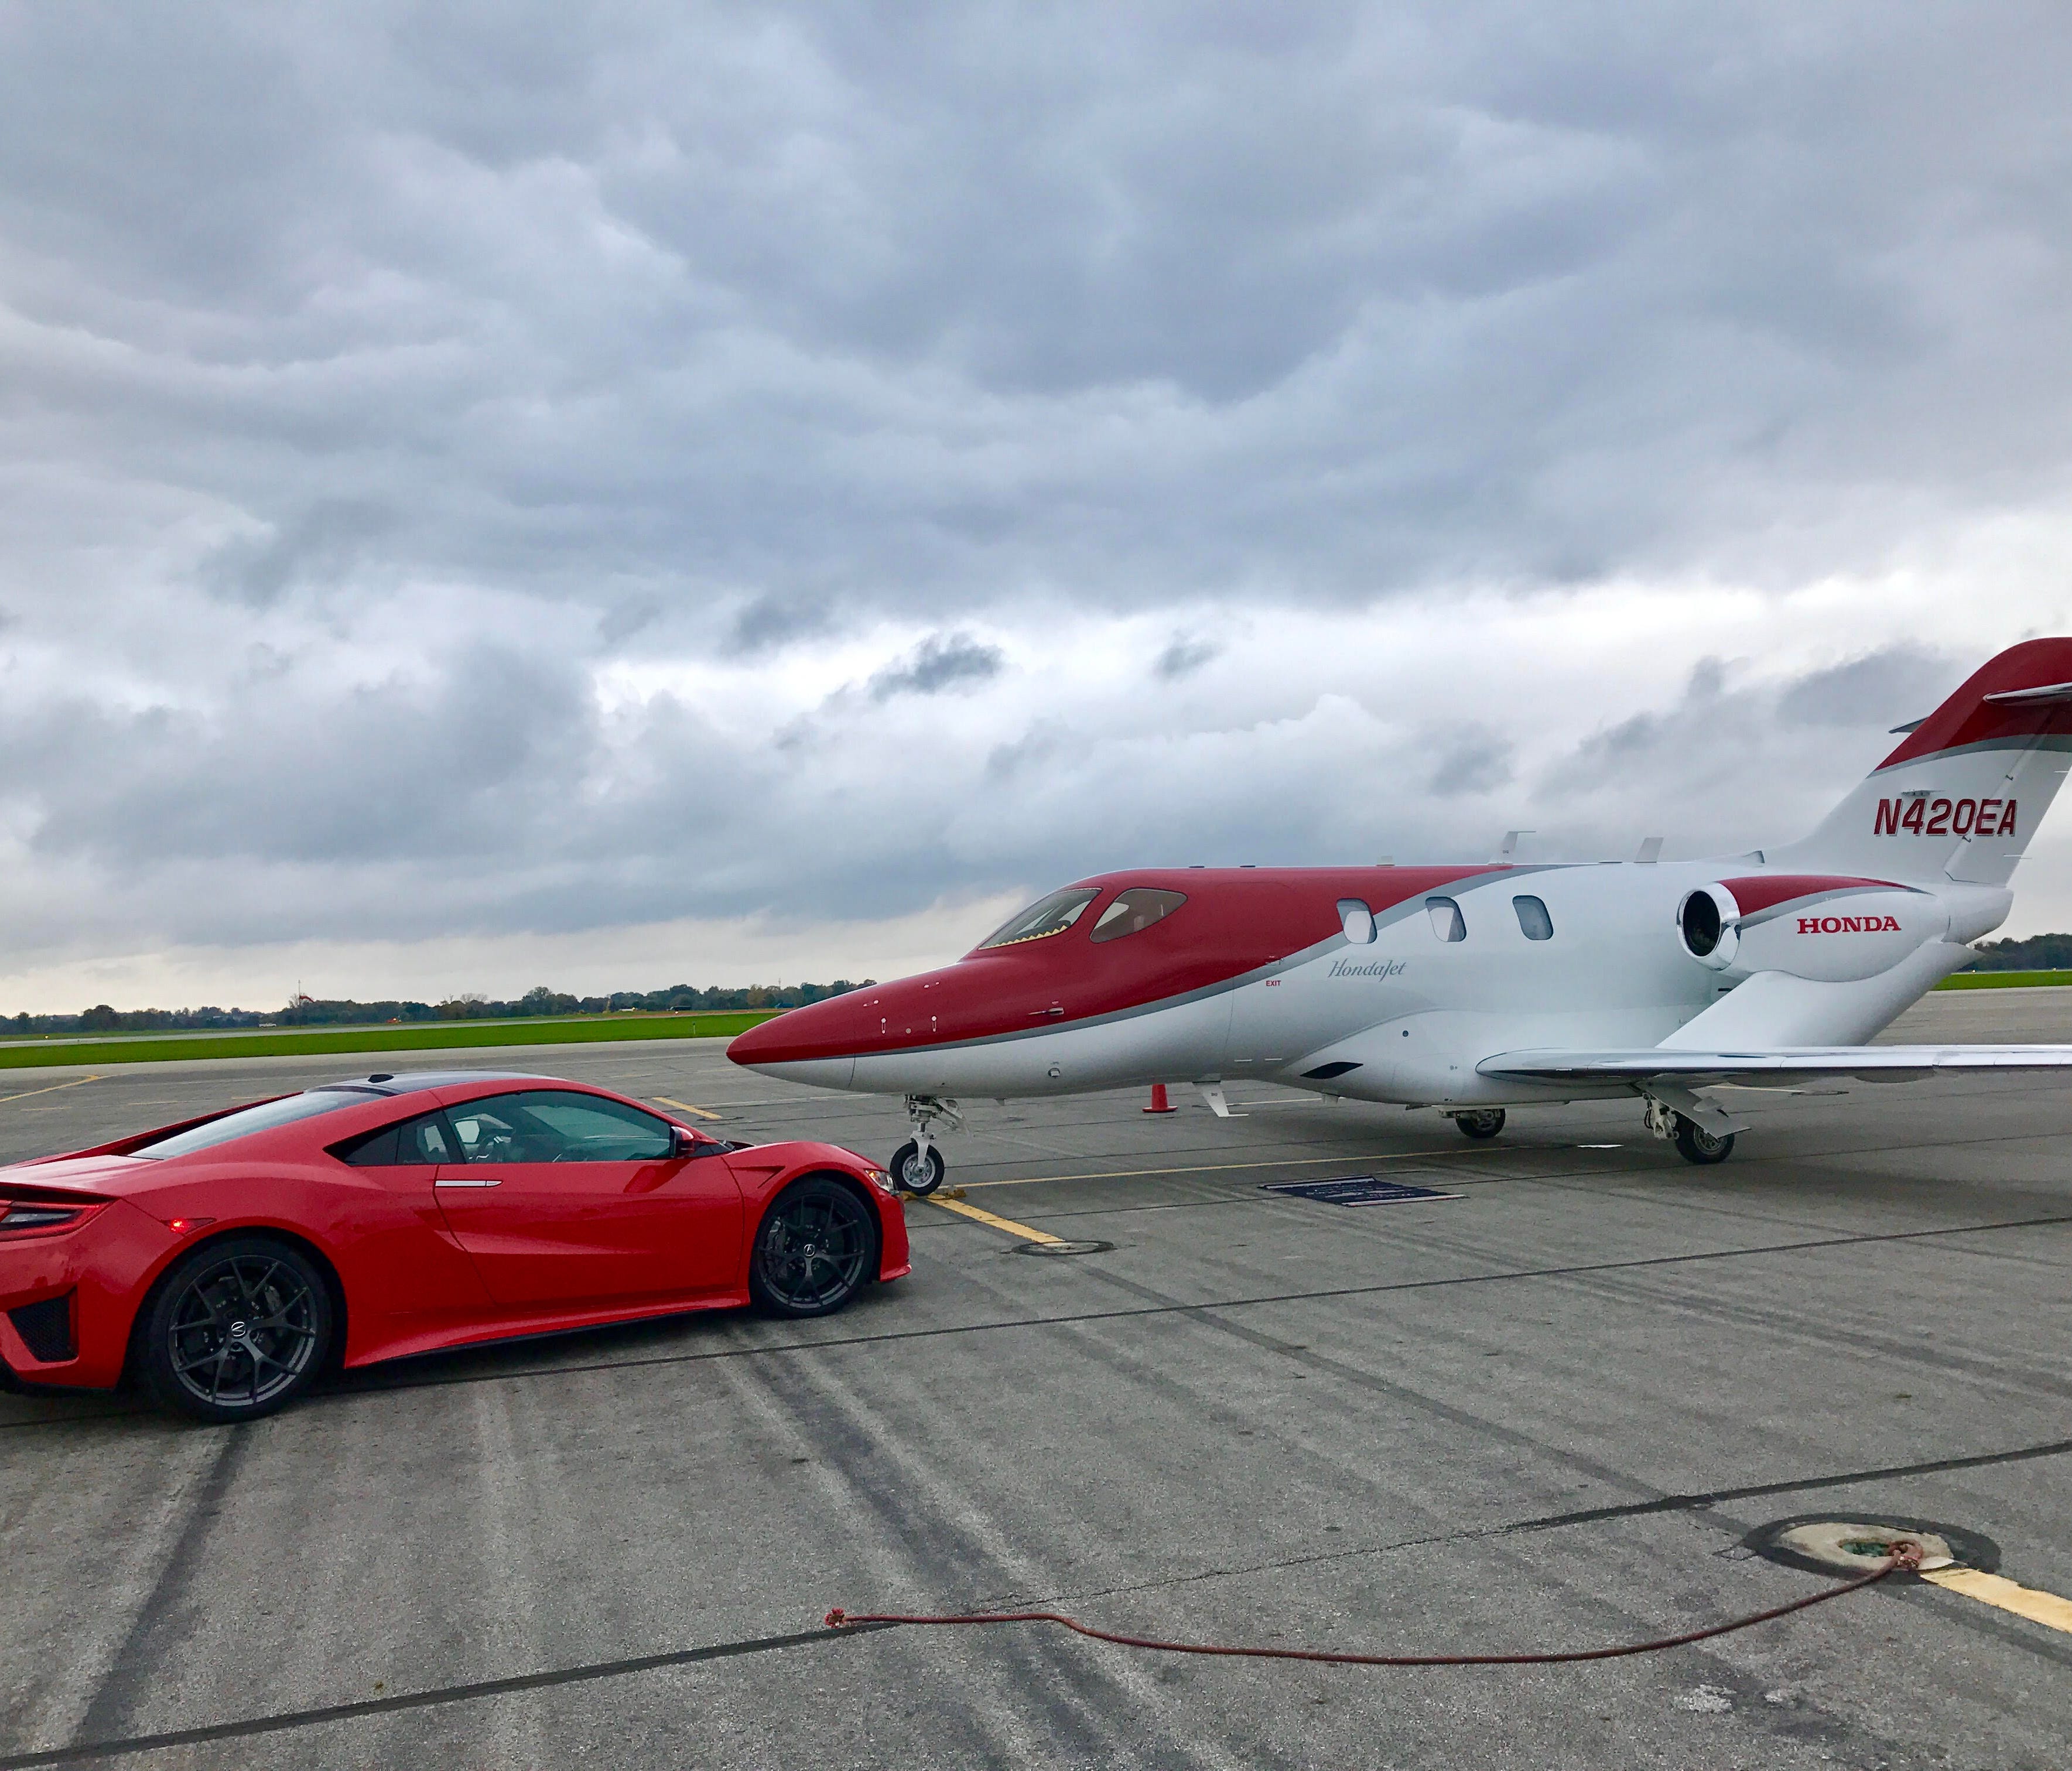 Honda has developed a private jet as well as the second generation NSX sports car.